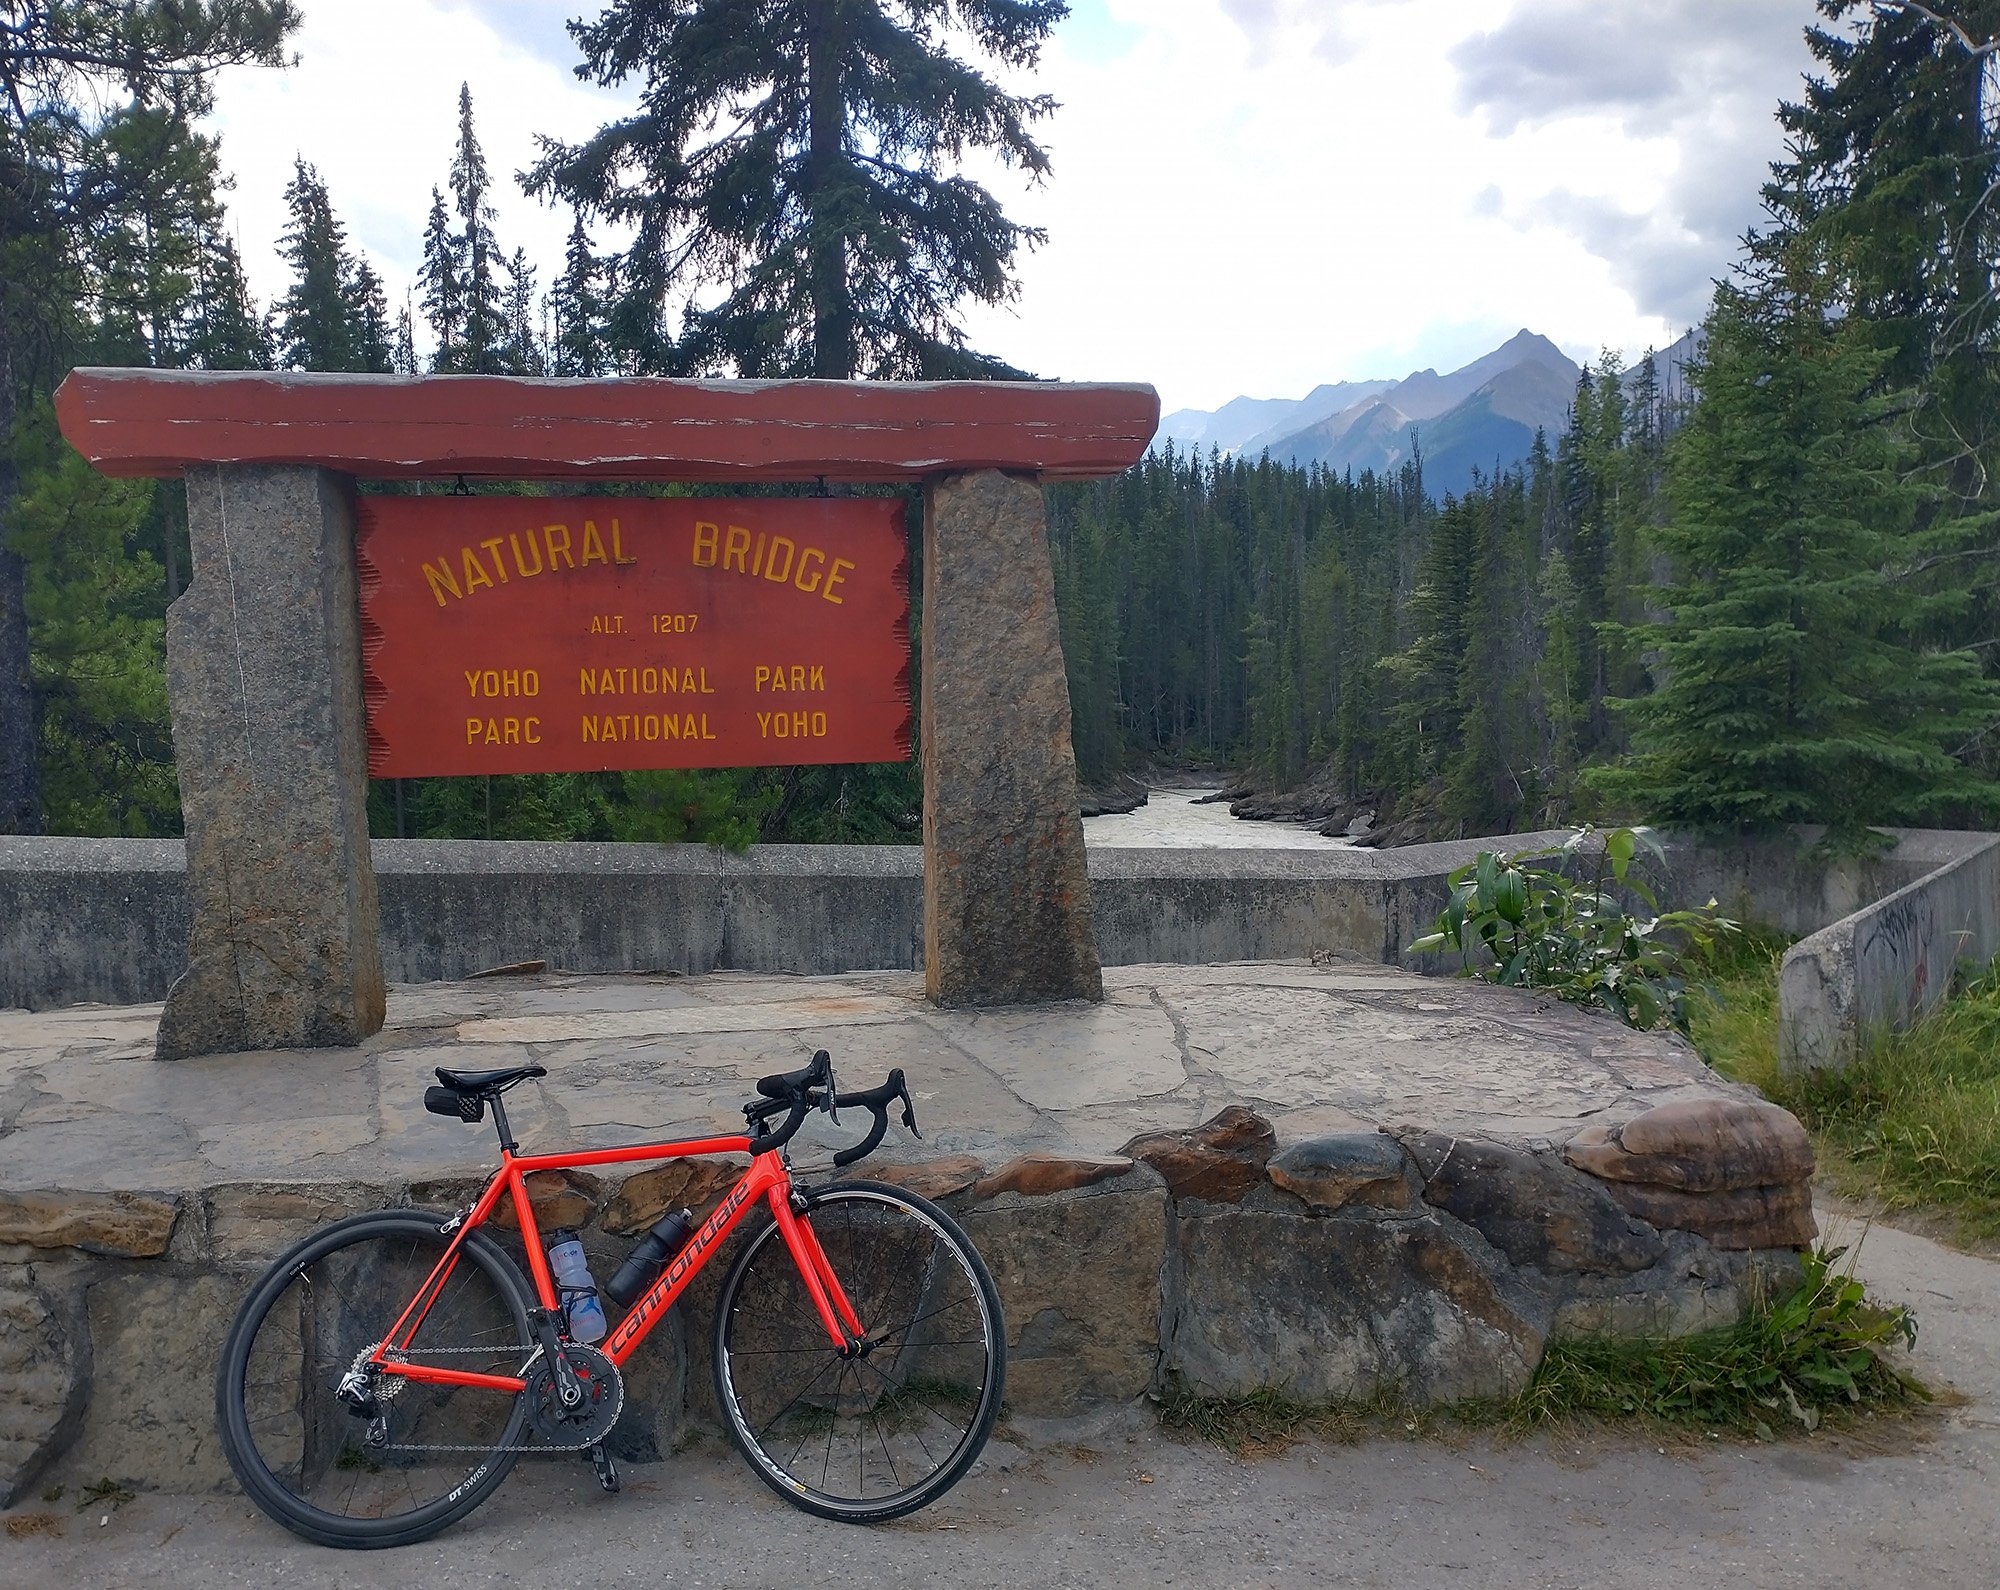 Furthest stop of this ride: Emerald lake and the Natural Bridge.